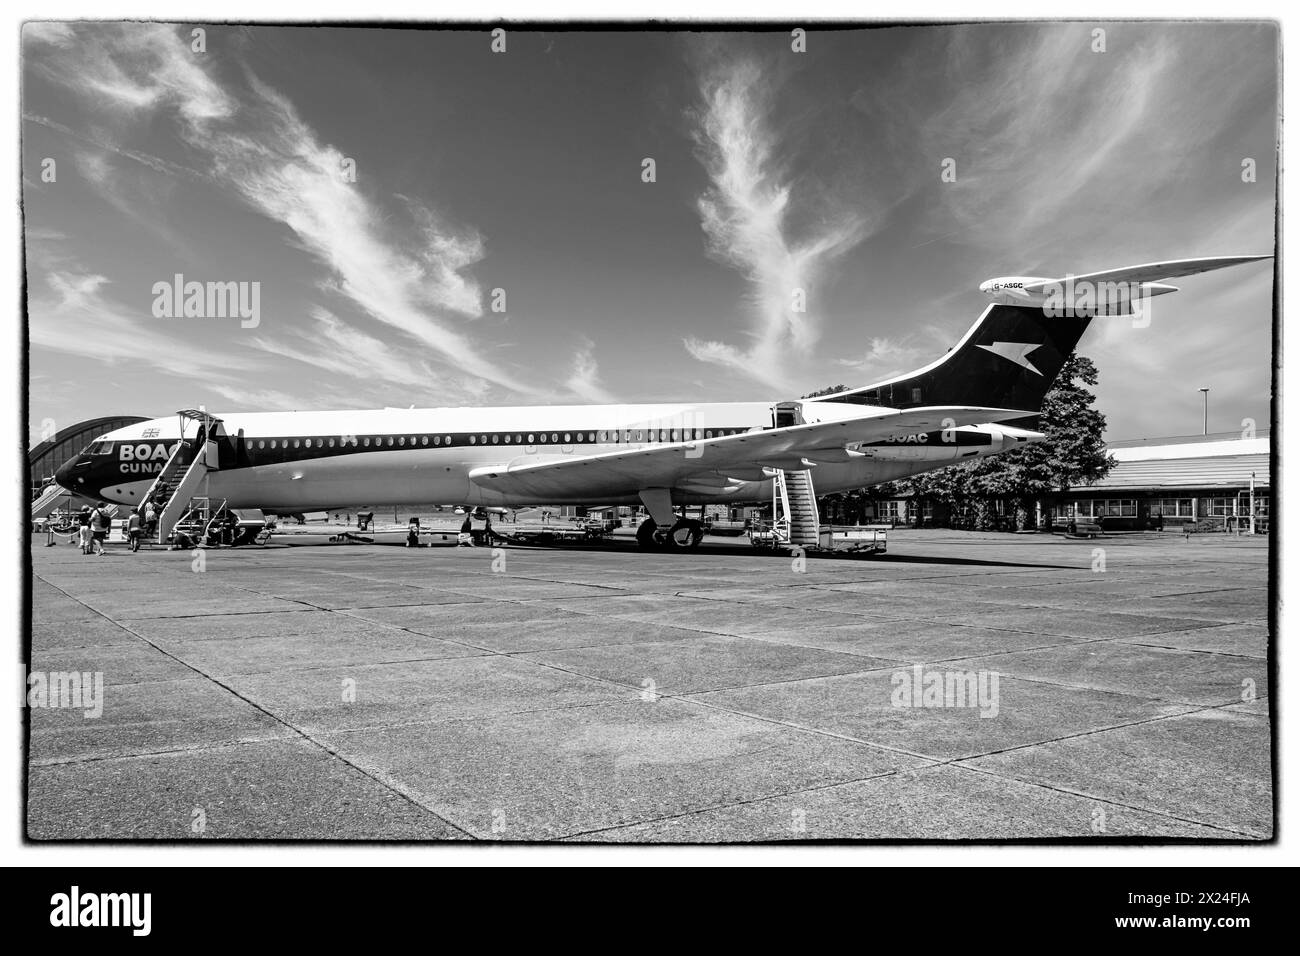 A BOAC Cunard Vickers VC10 1960s airliner Stock Photo